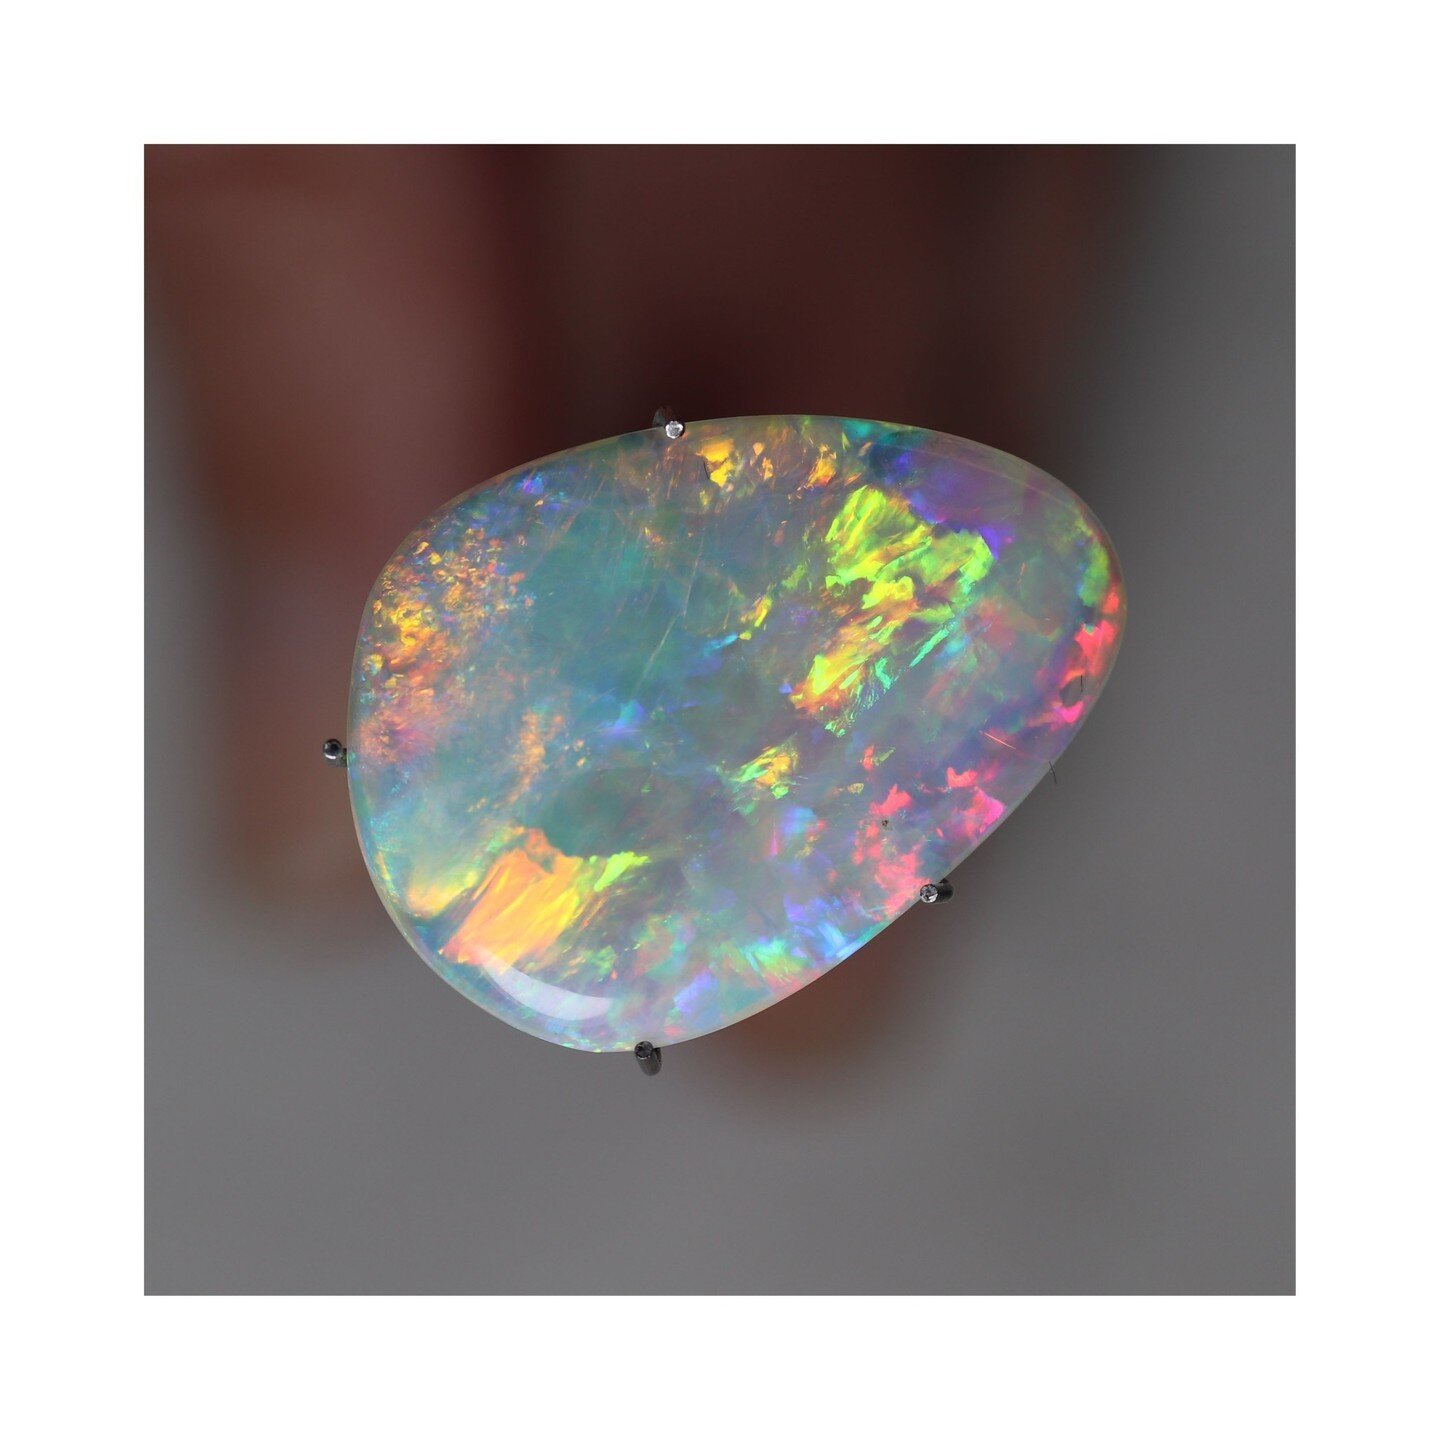 Every now and then you come across an opal that blows your mind with it's intrinsic vibrancy and intricate almost brushstroke patterns. This one well and truly hits that mark for me 🙌🎨

#queenofgems #crystalopal #australianopal #opallove #opalsecre